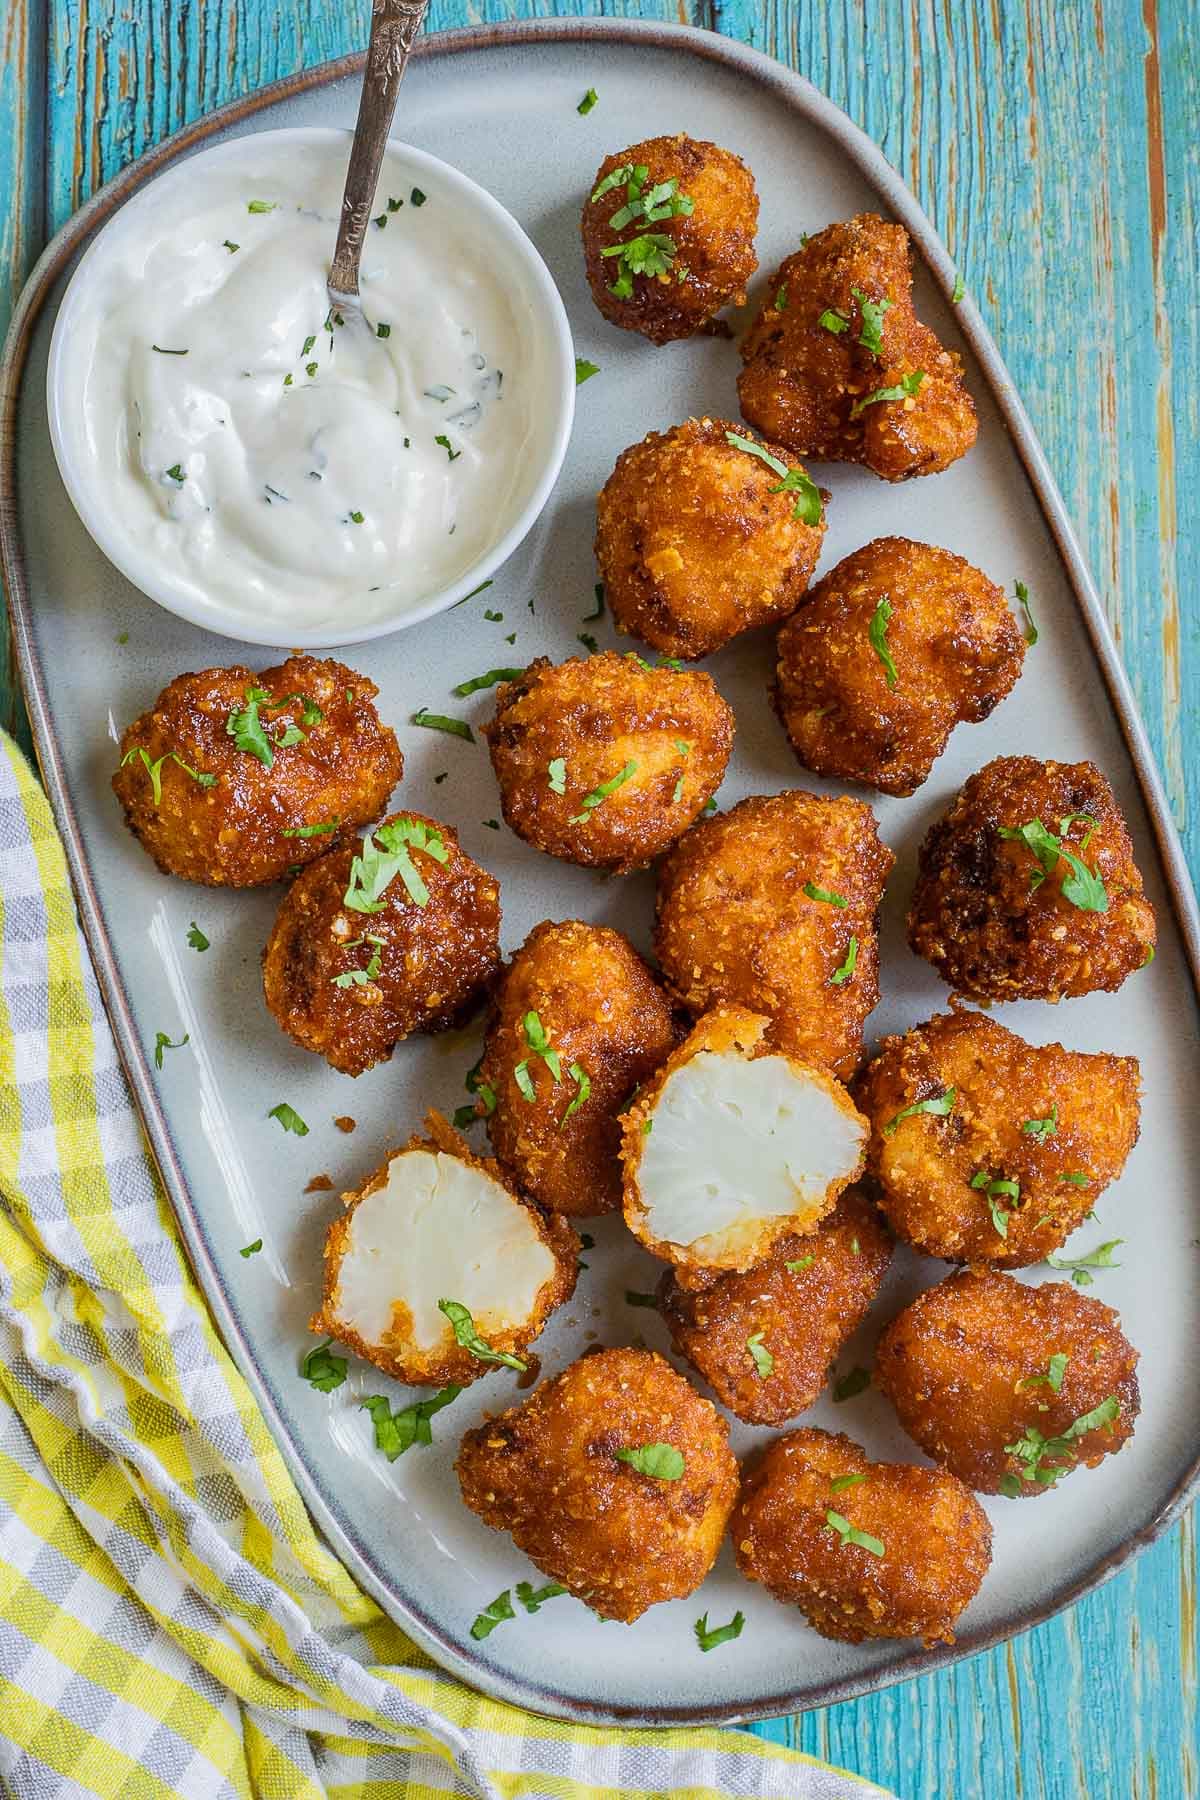 Breaded cauliflower florets in a light blue plate sprinkled with chopped green herbs and served with a small bowl of white sauce. One floret is cut in half to show the white insides.